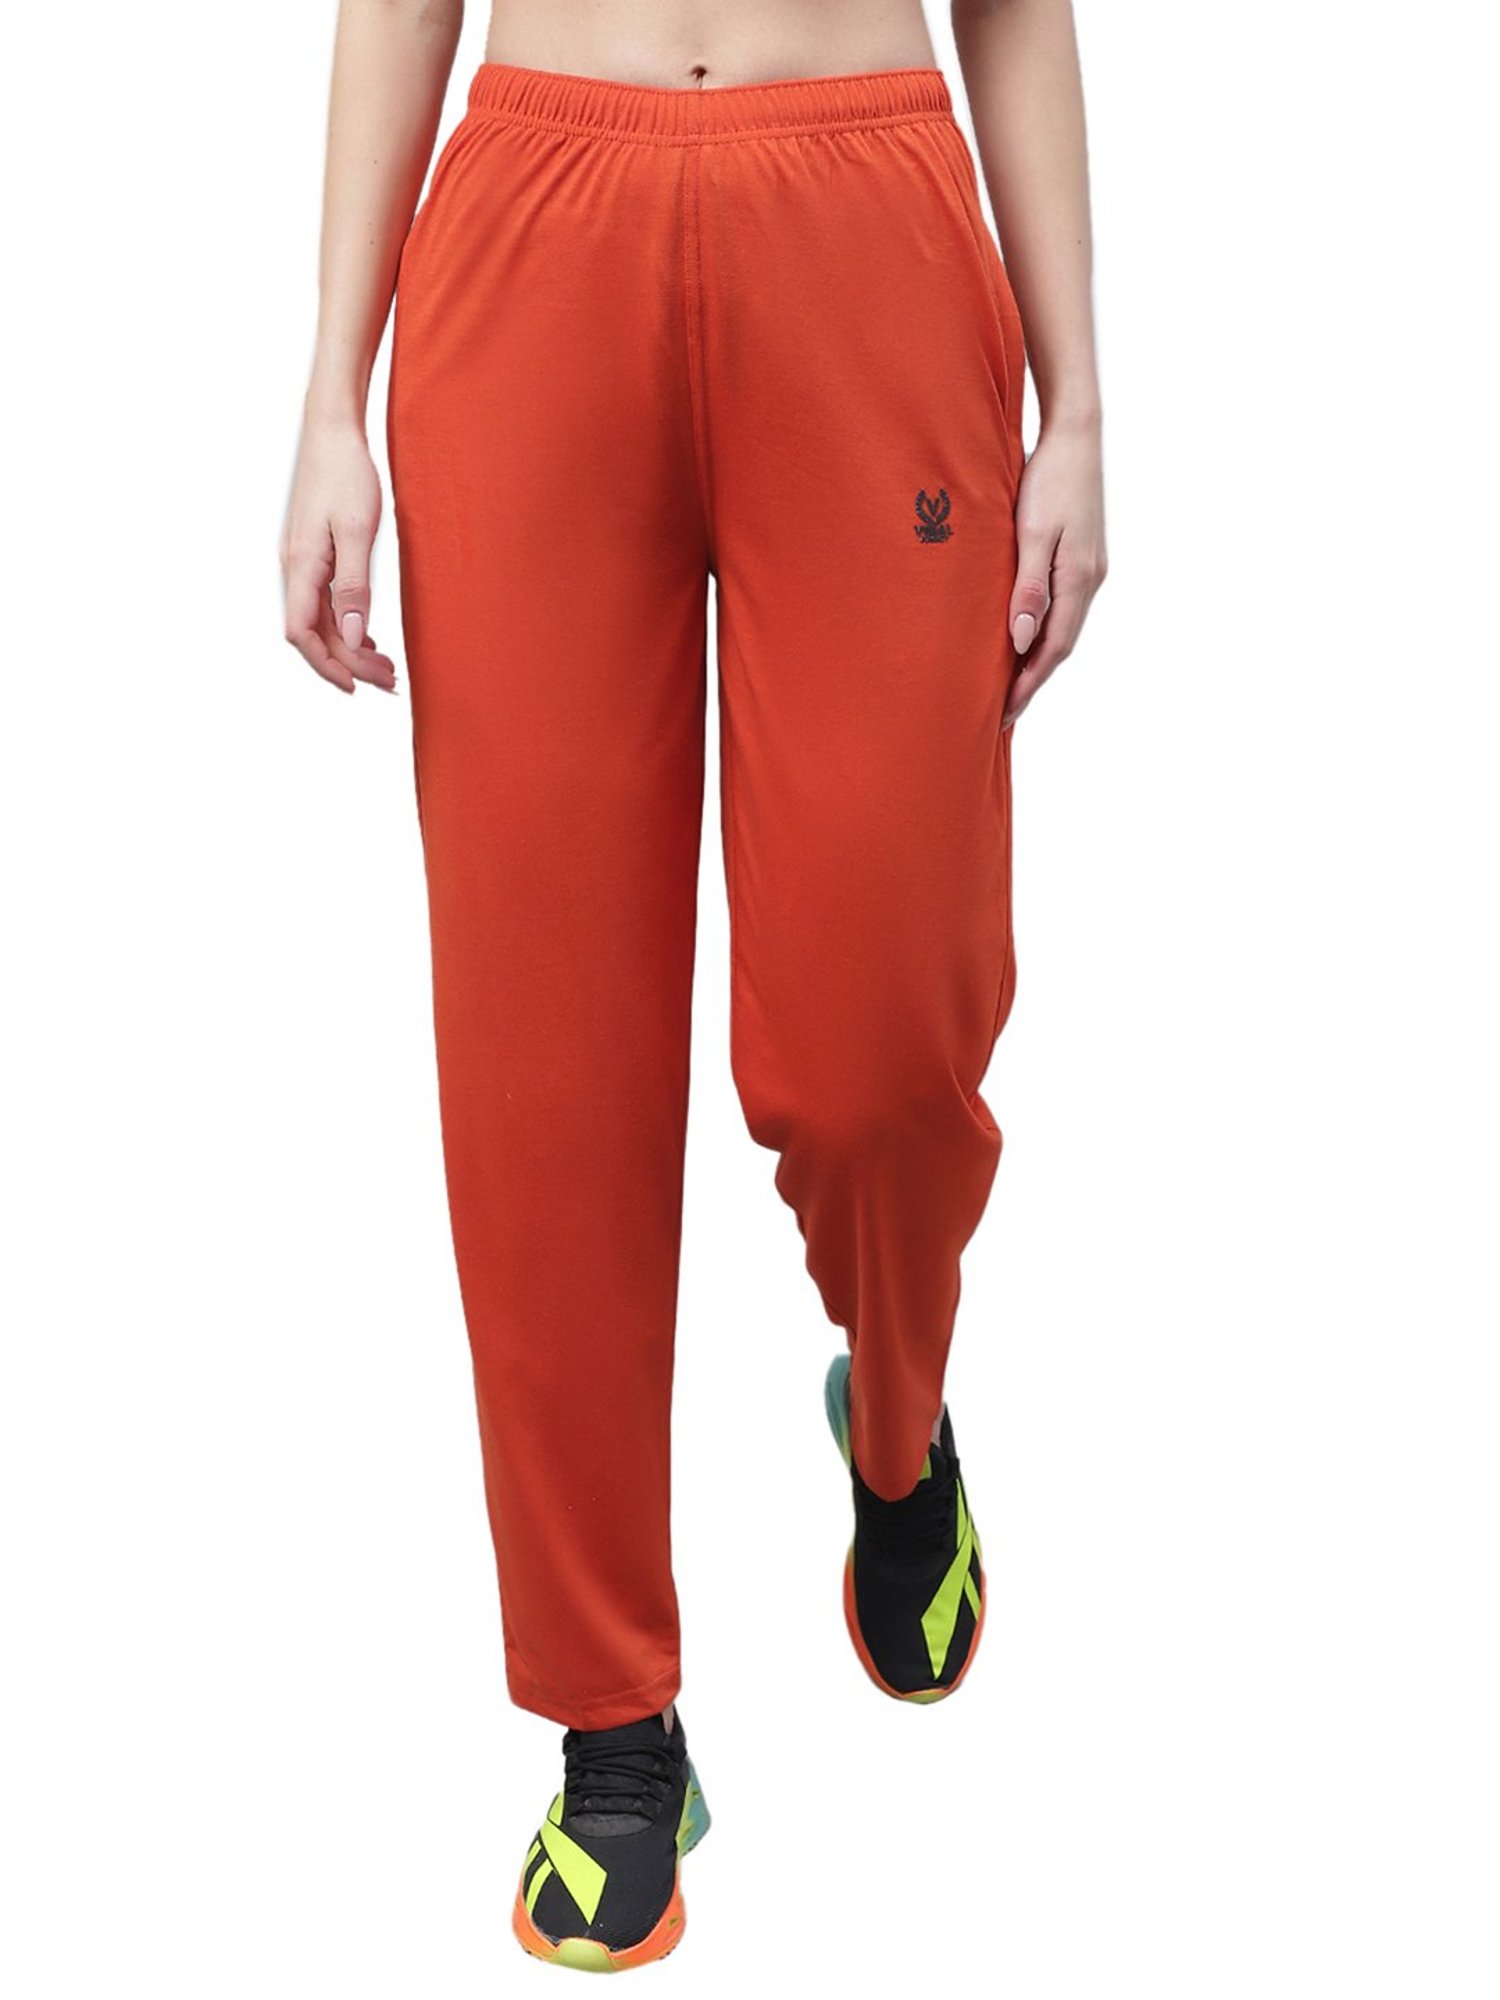 Lyra Red Cotton Ankle Length Pants